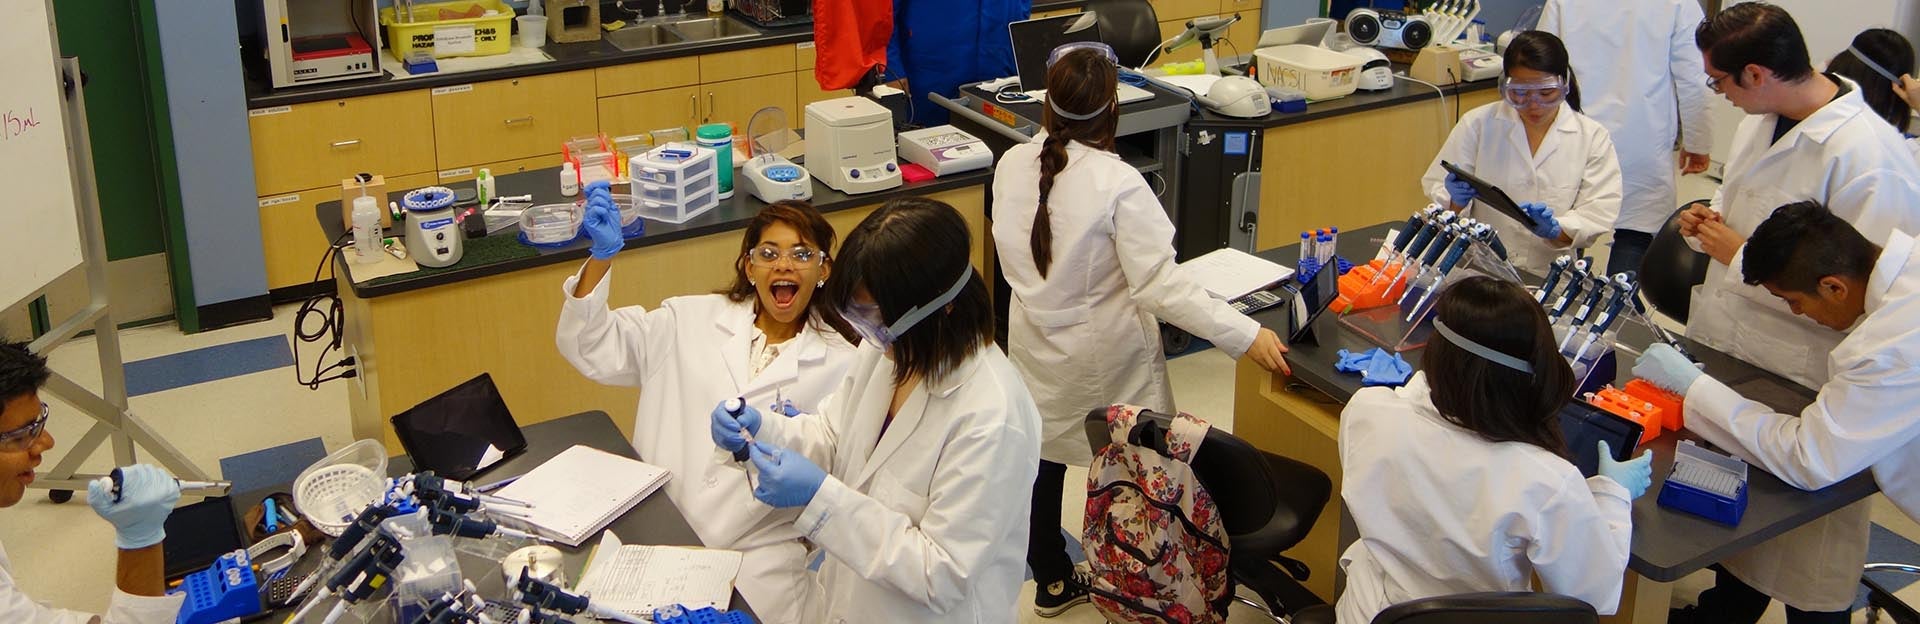 Students in the Neil A Campbell Science Learning Laboratory